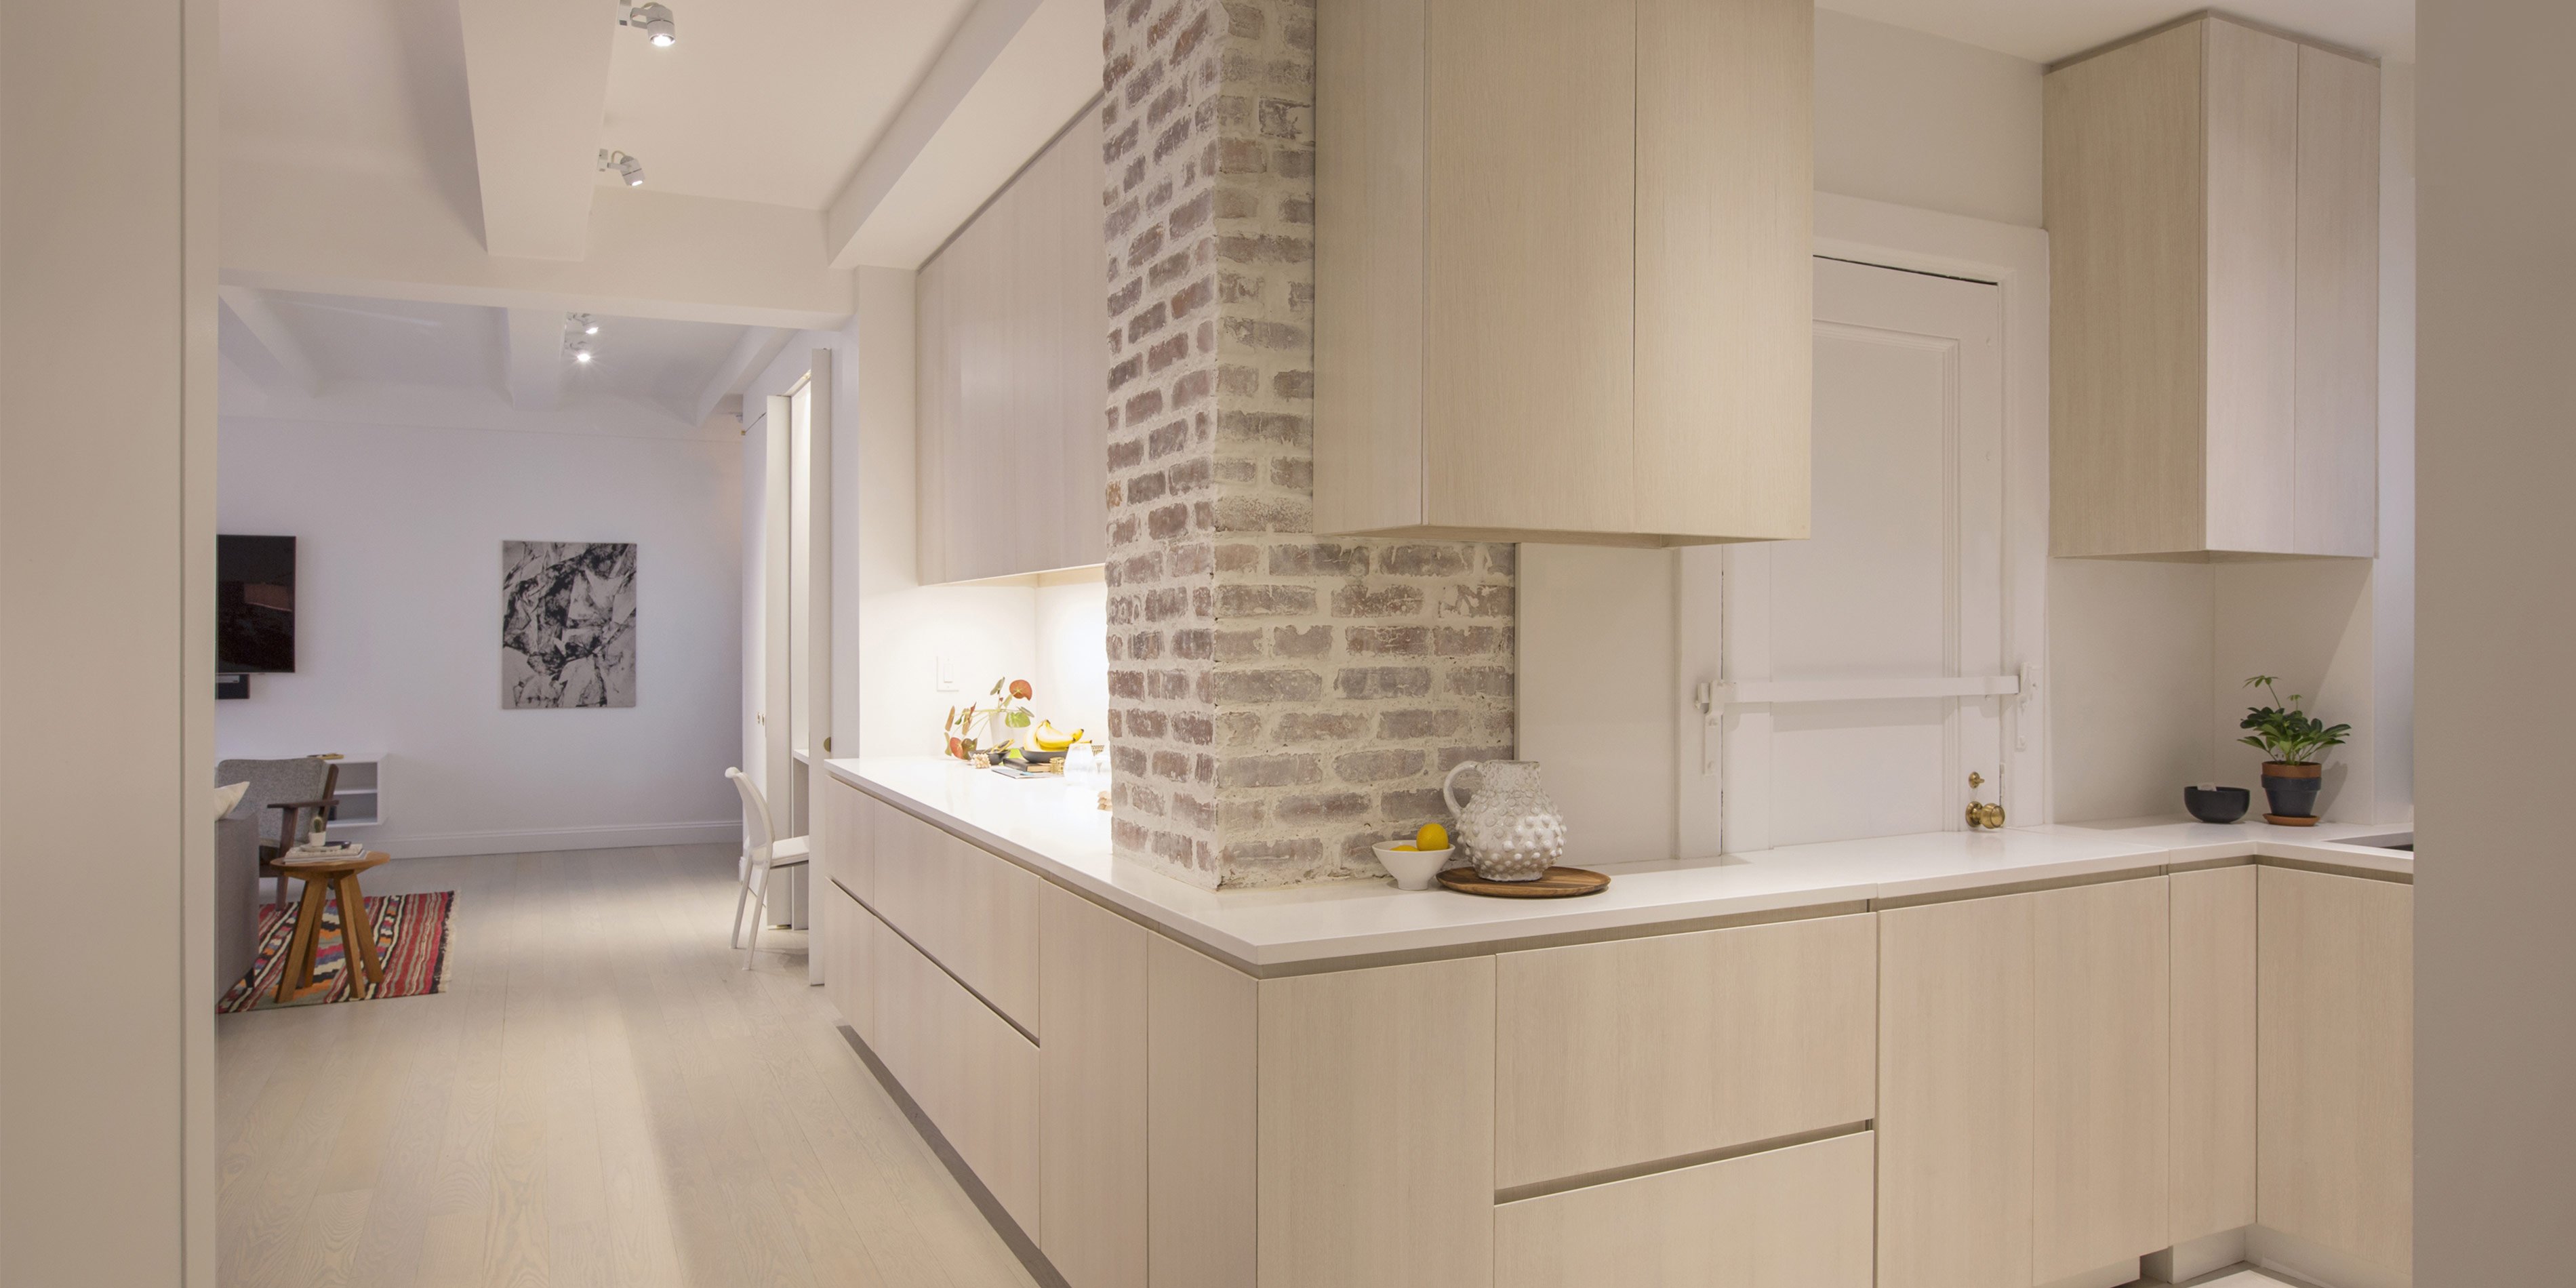 NYC Architect Architecture Renovate Renovation Residential Upper West Side Apartment Co-op Modern Pre-War Existing Details Exposed Brick Kitchen